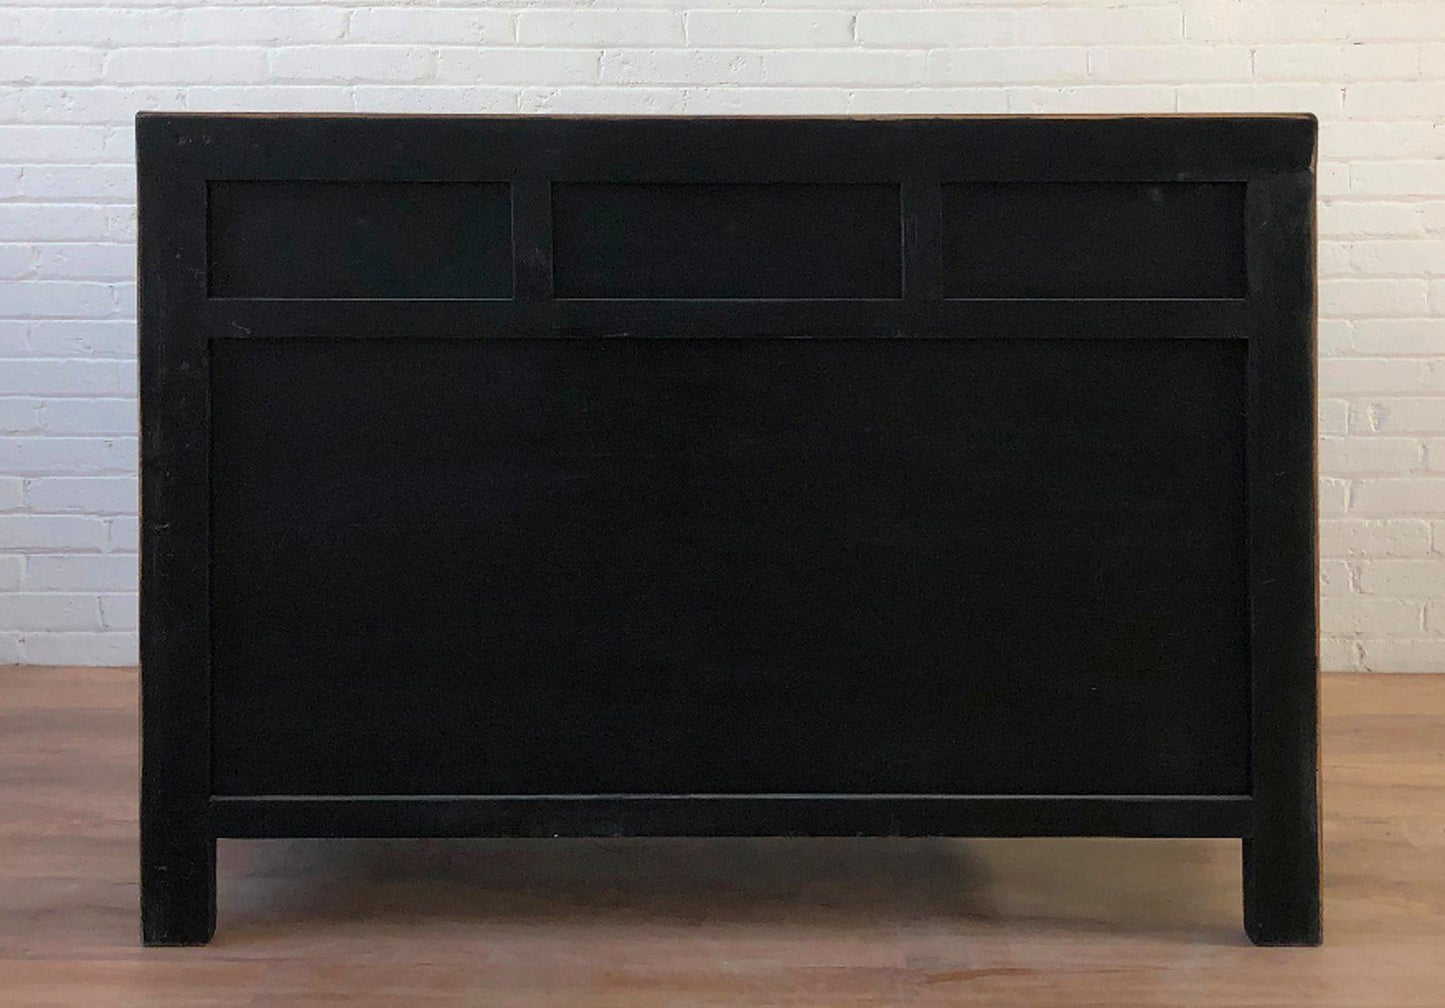 Chinese chest of drawers sideboard shelf "LesNoirs" - Art. 33082-11